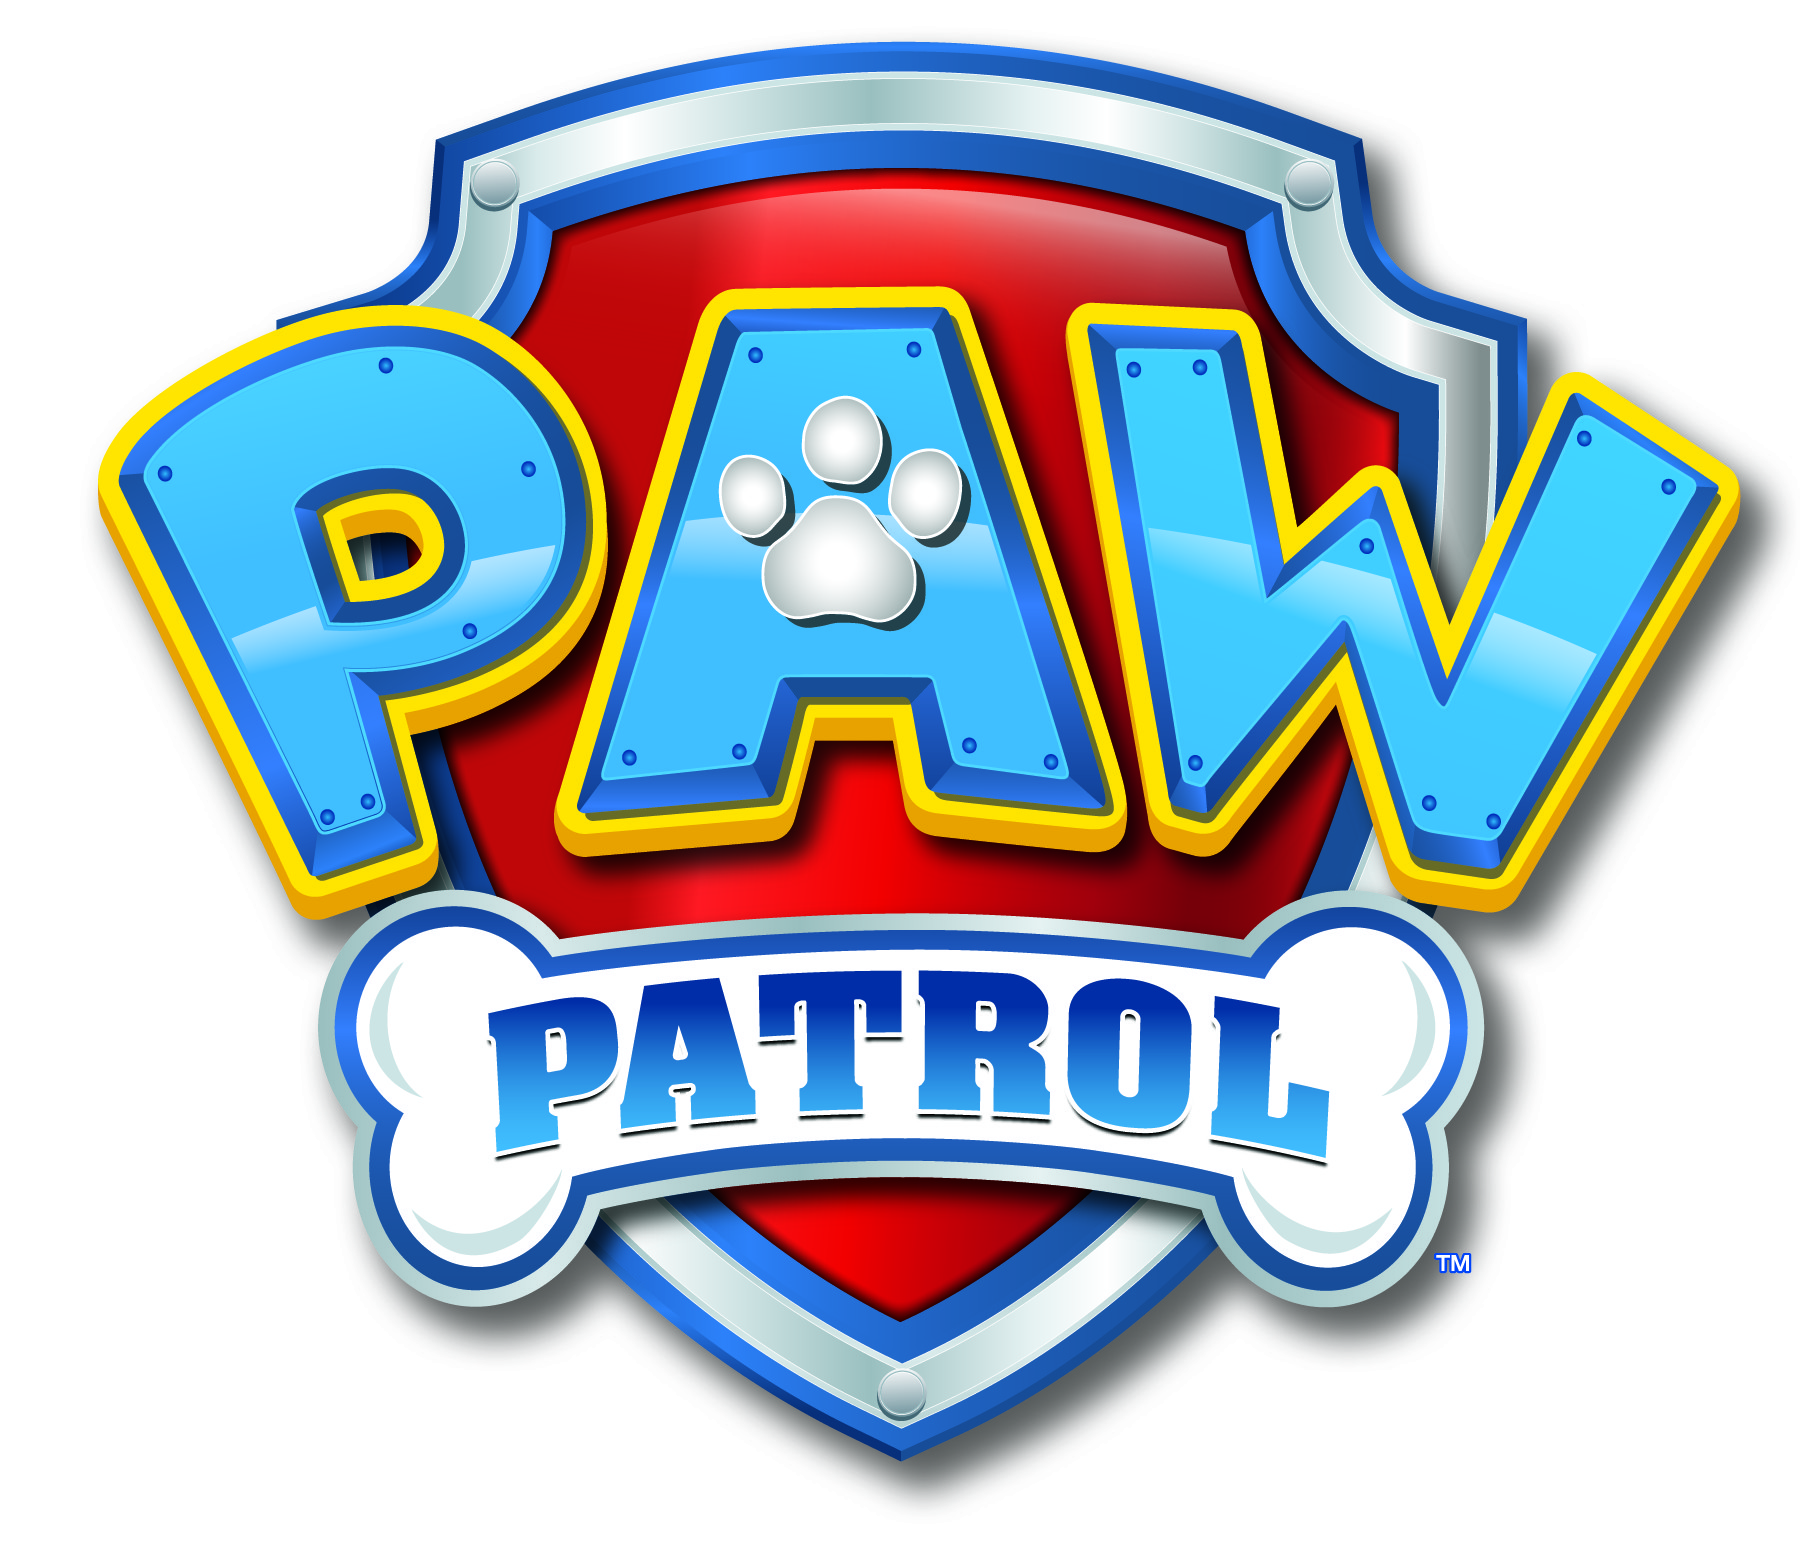 Its Highly Anticipated Paw Patrol Toy Line At Toys R Us